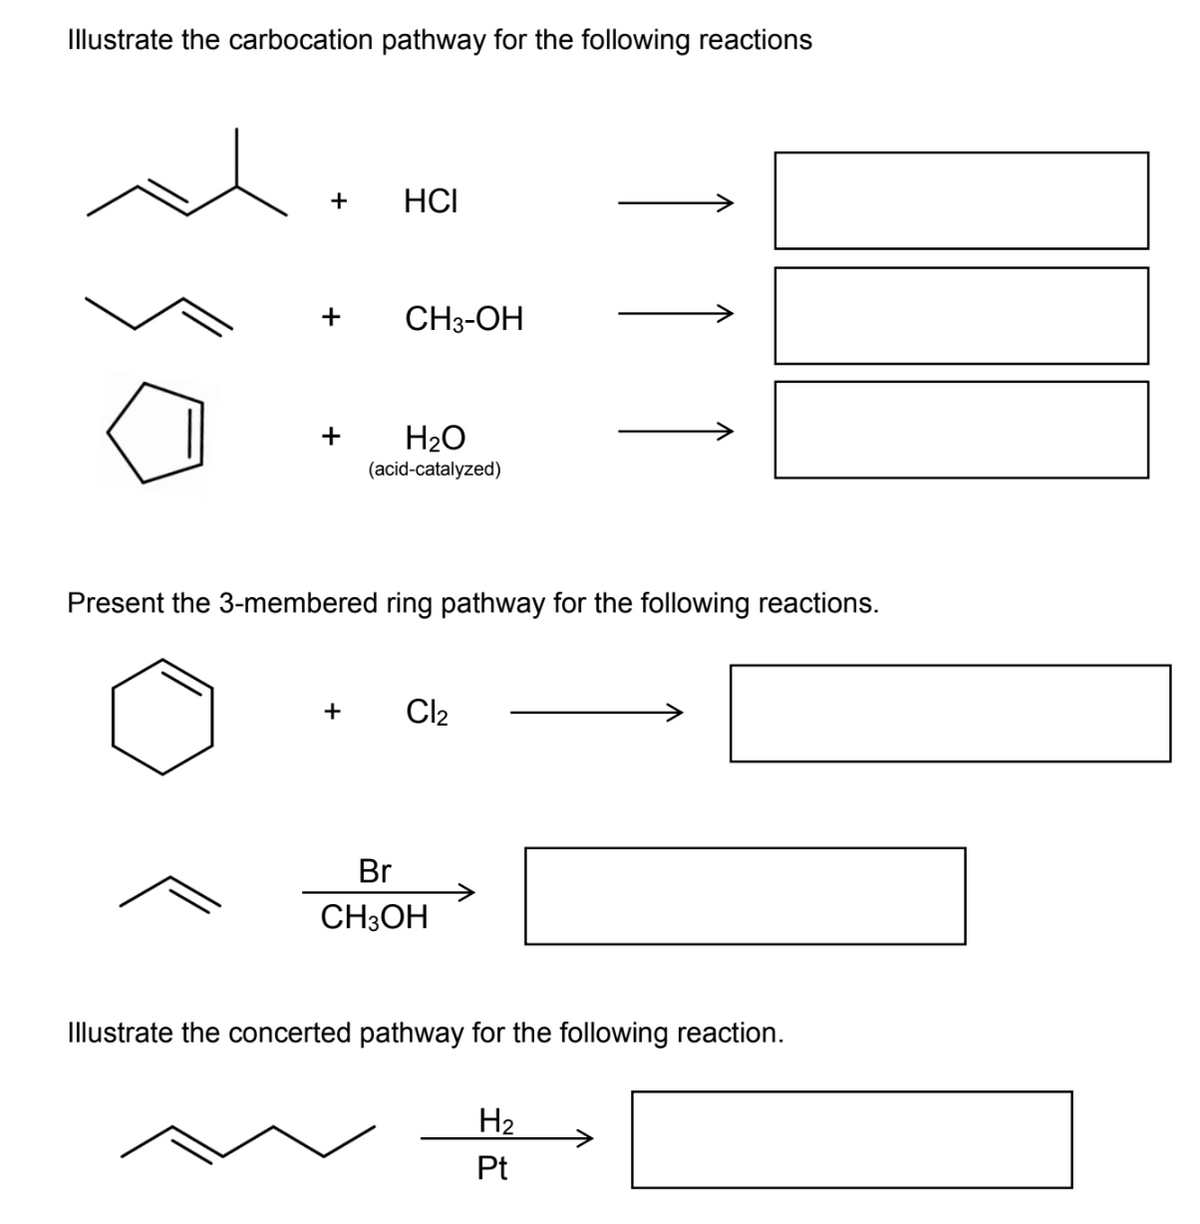 Illustrate the carbocation pathway for the following reactions
HCI
+
CH3-OH
+
H2O
(acid-catalyzed)
Present the 3-membered ring pathway for the following reactions.
+
Cl2
Br
CH3OH
Illustrate the concerted pathway for the following reaction.
H2
Pt
